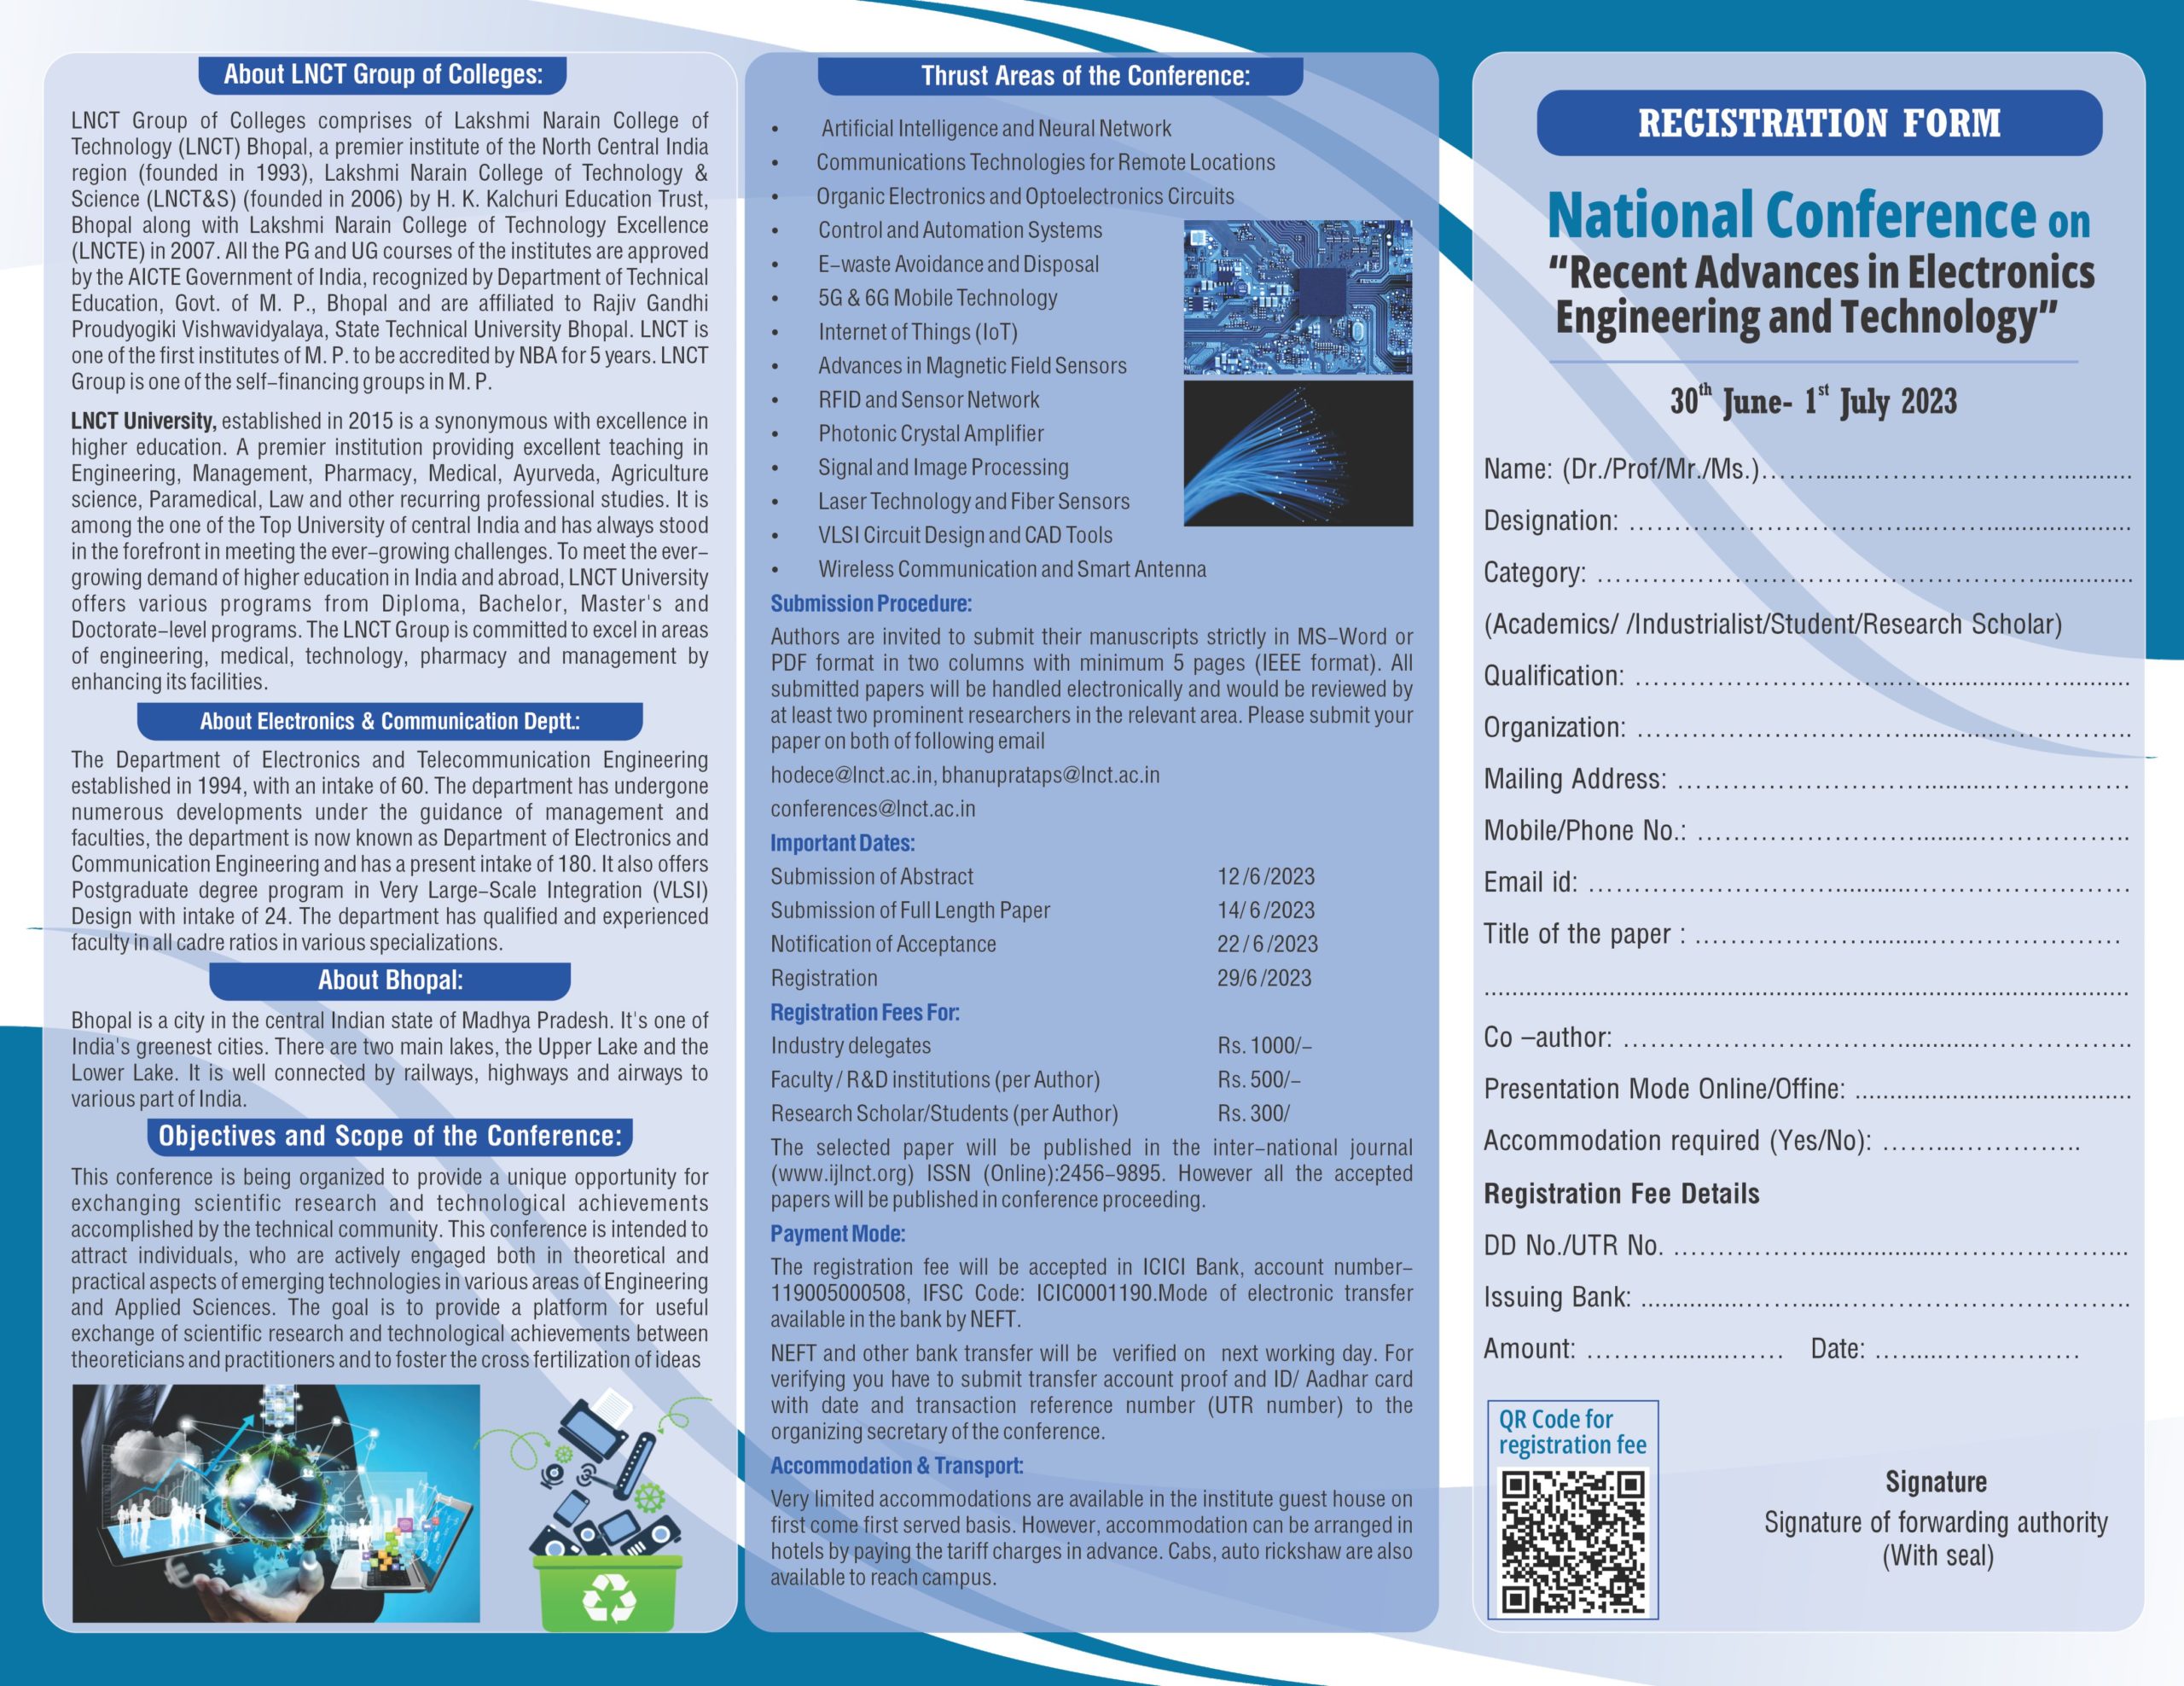 National Conference on Recent Advances in Electronics Engineering and Technology 1